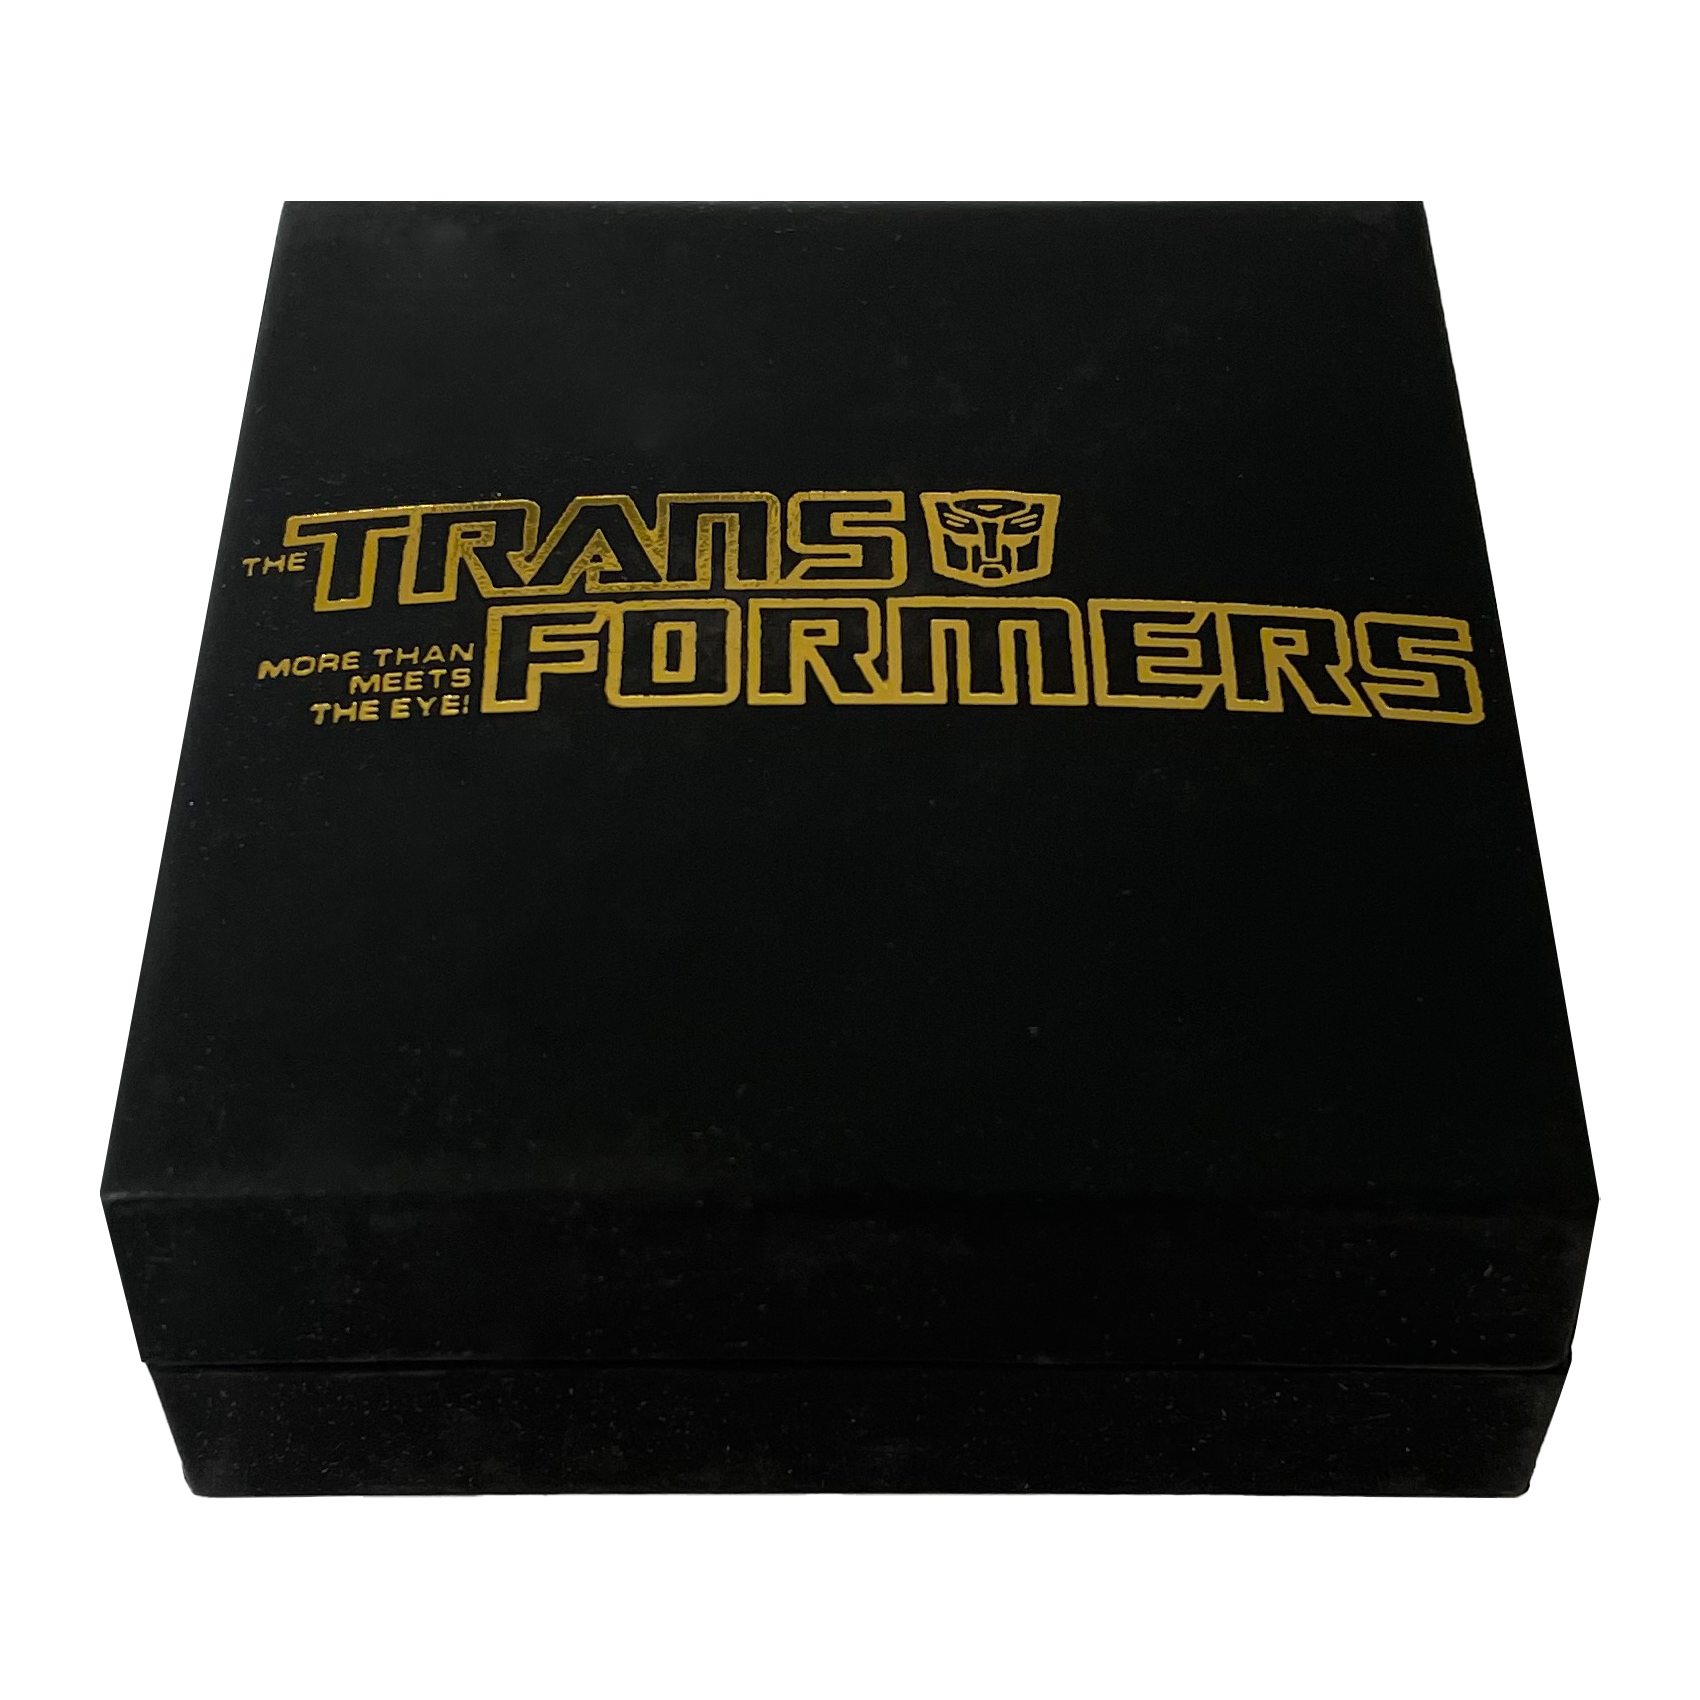 Transformers Autobot X Decepticon 24K Gold Plated Pin Set (Comic Con Exclusive) - Icon Heroes 